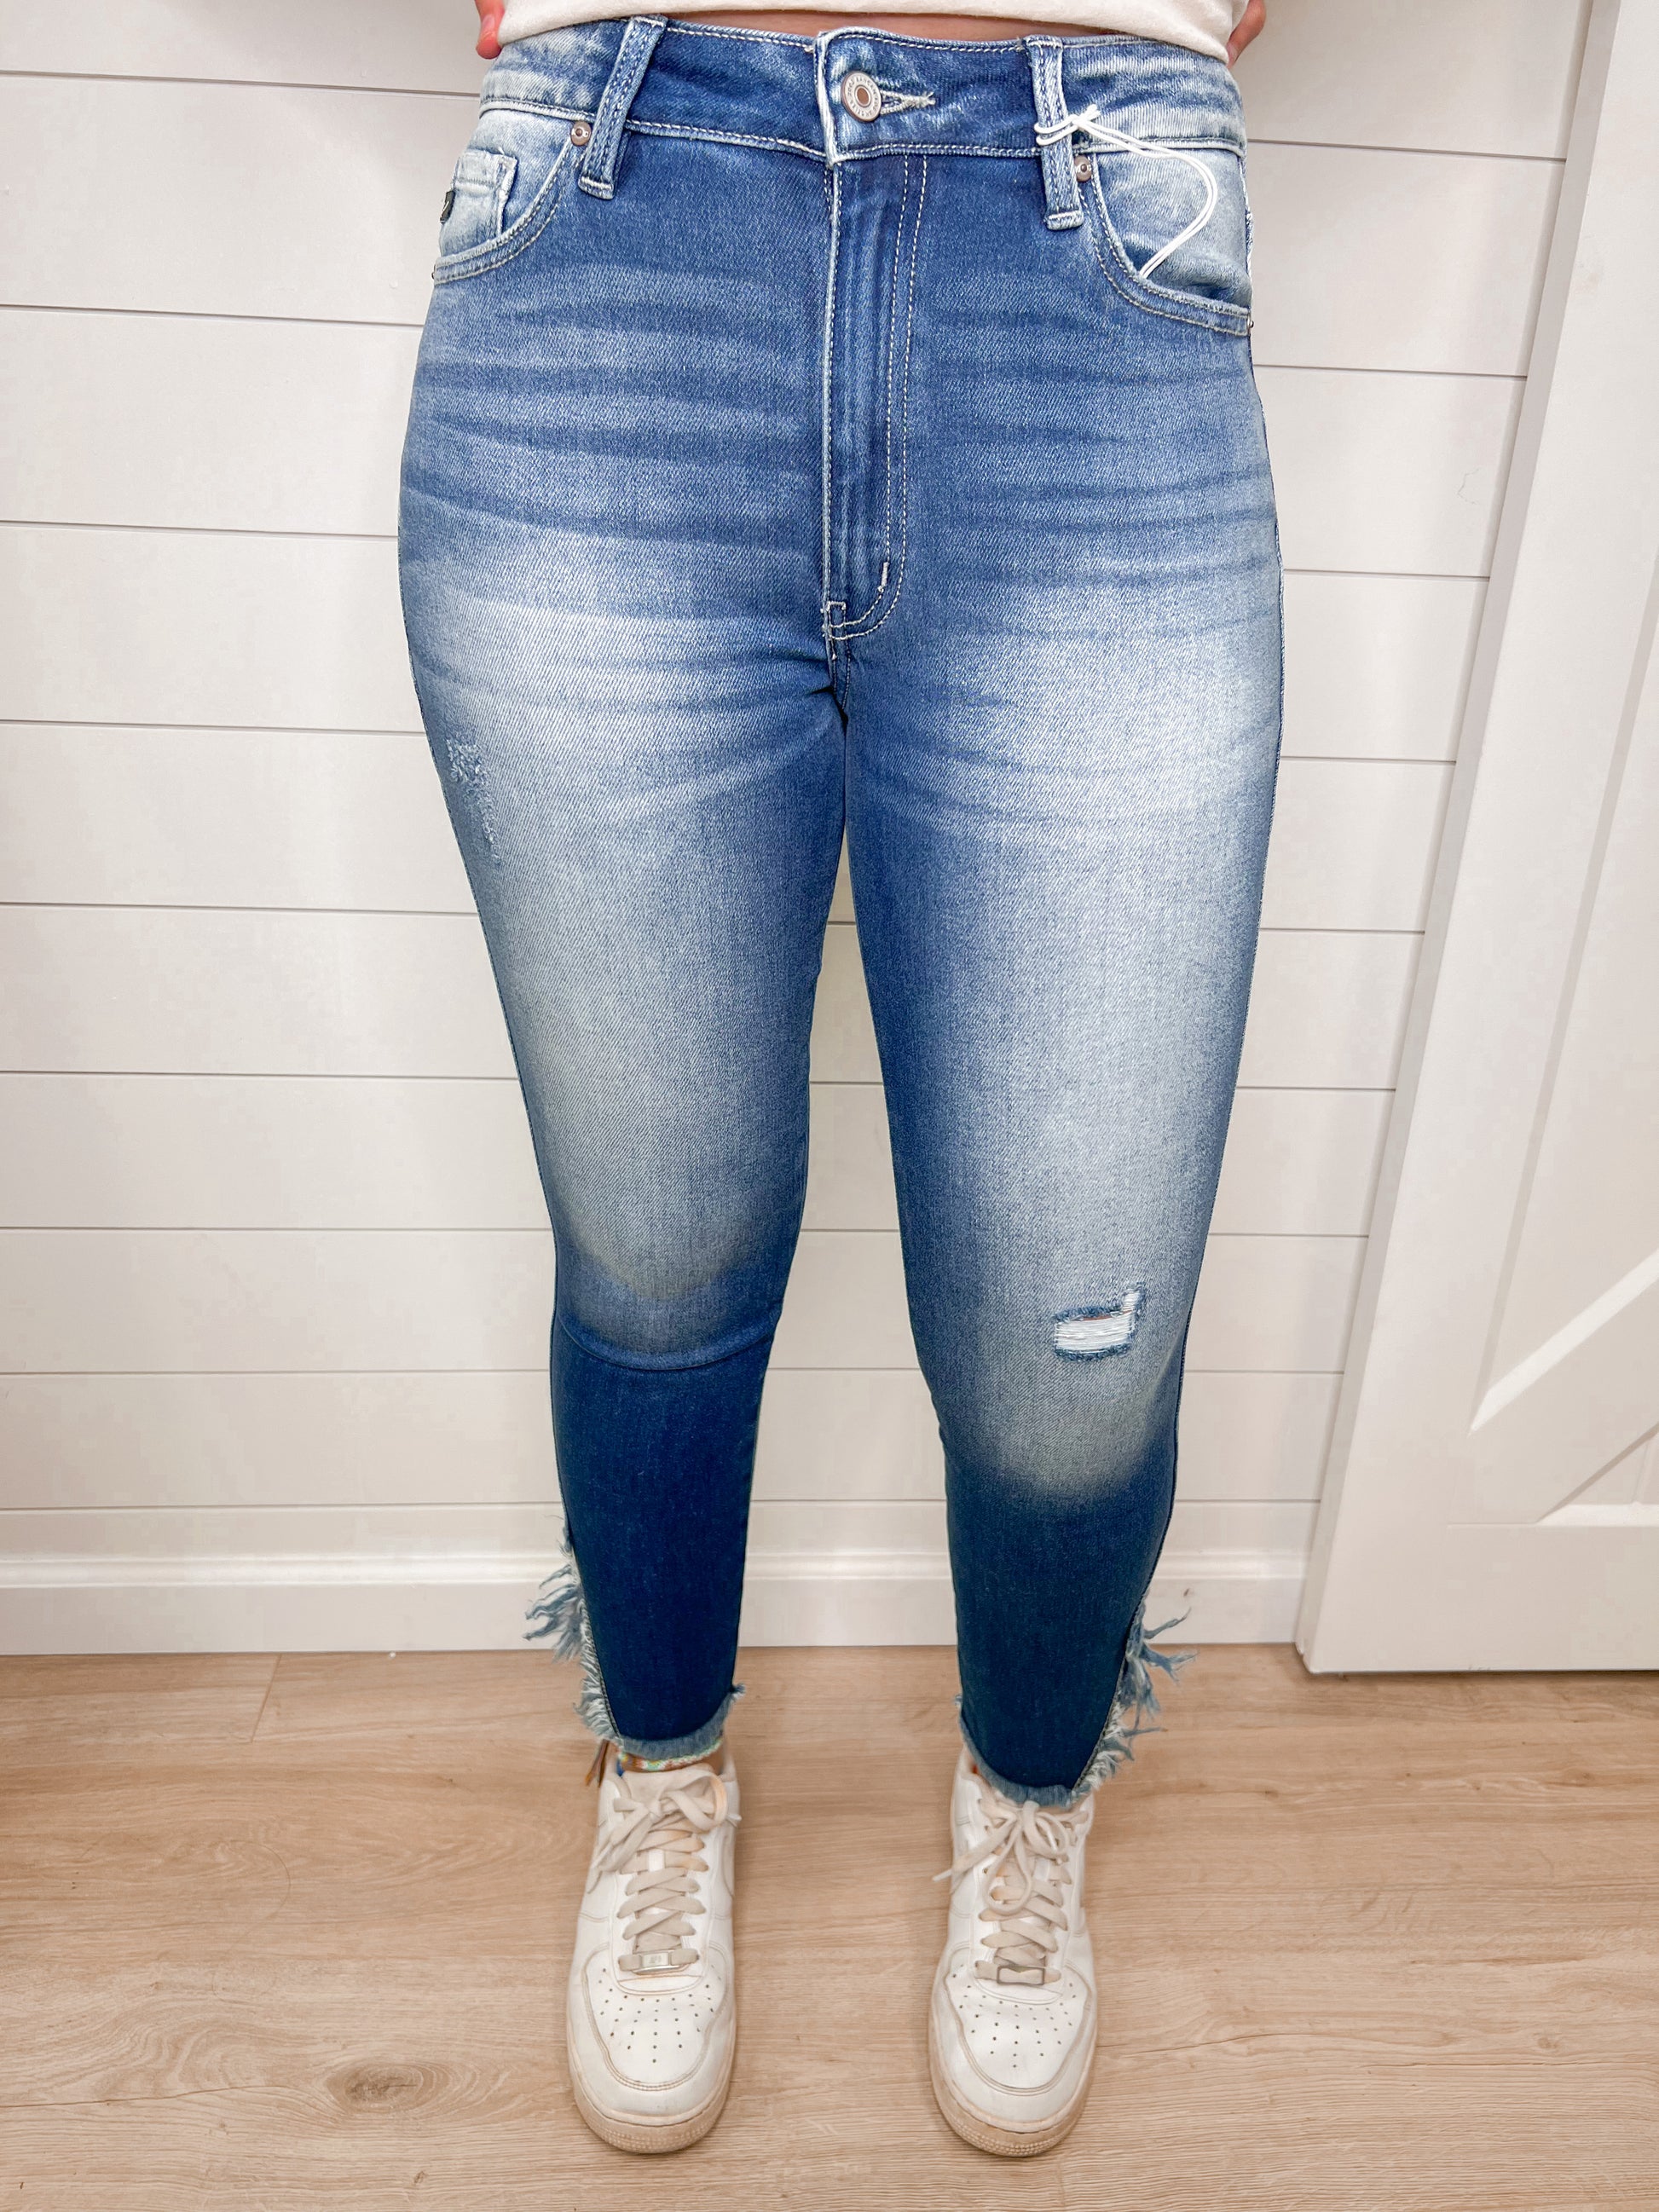 Gemma High Rise Ankle Skinny KanCan Jeans-High Rise Jeans-Kan Can-09/06/23, 1st md, 2nd md, 8/09/23 md, BIN C5, KC9167QM-The Twisted Chandelier